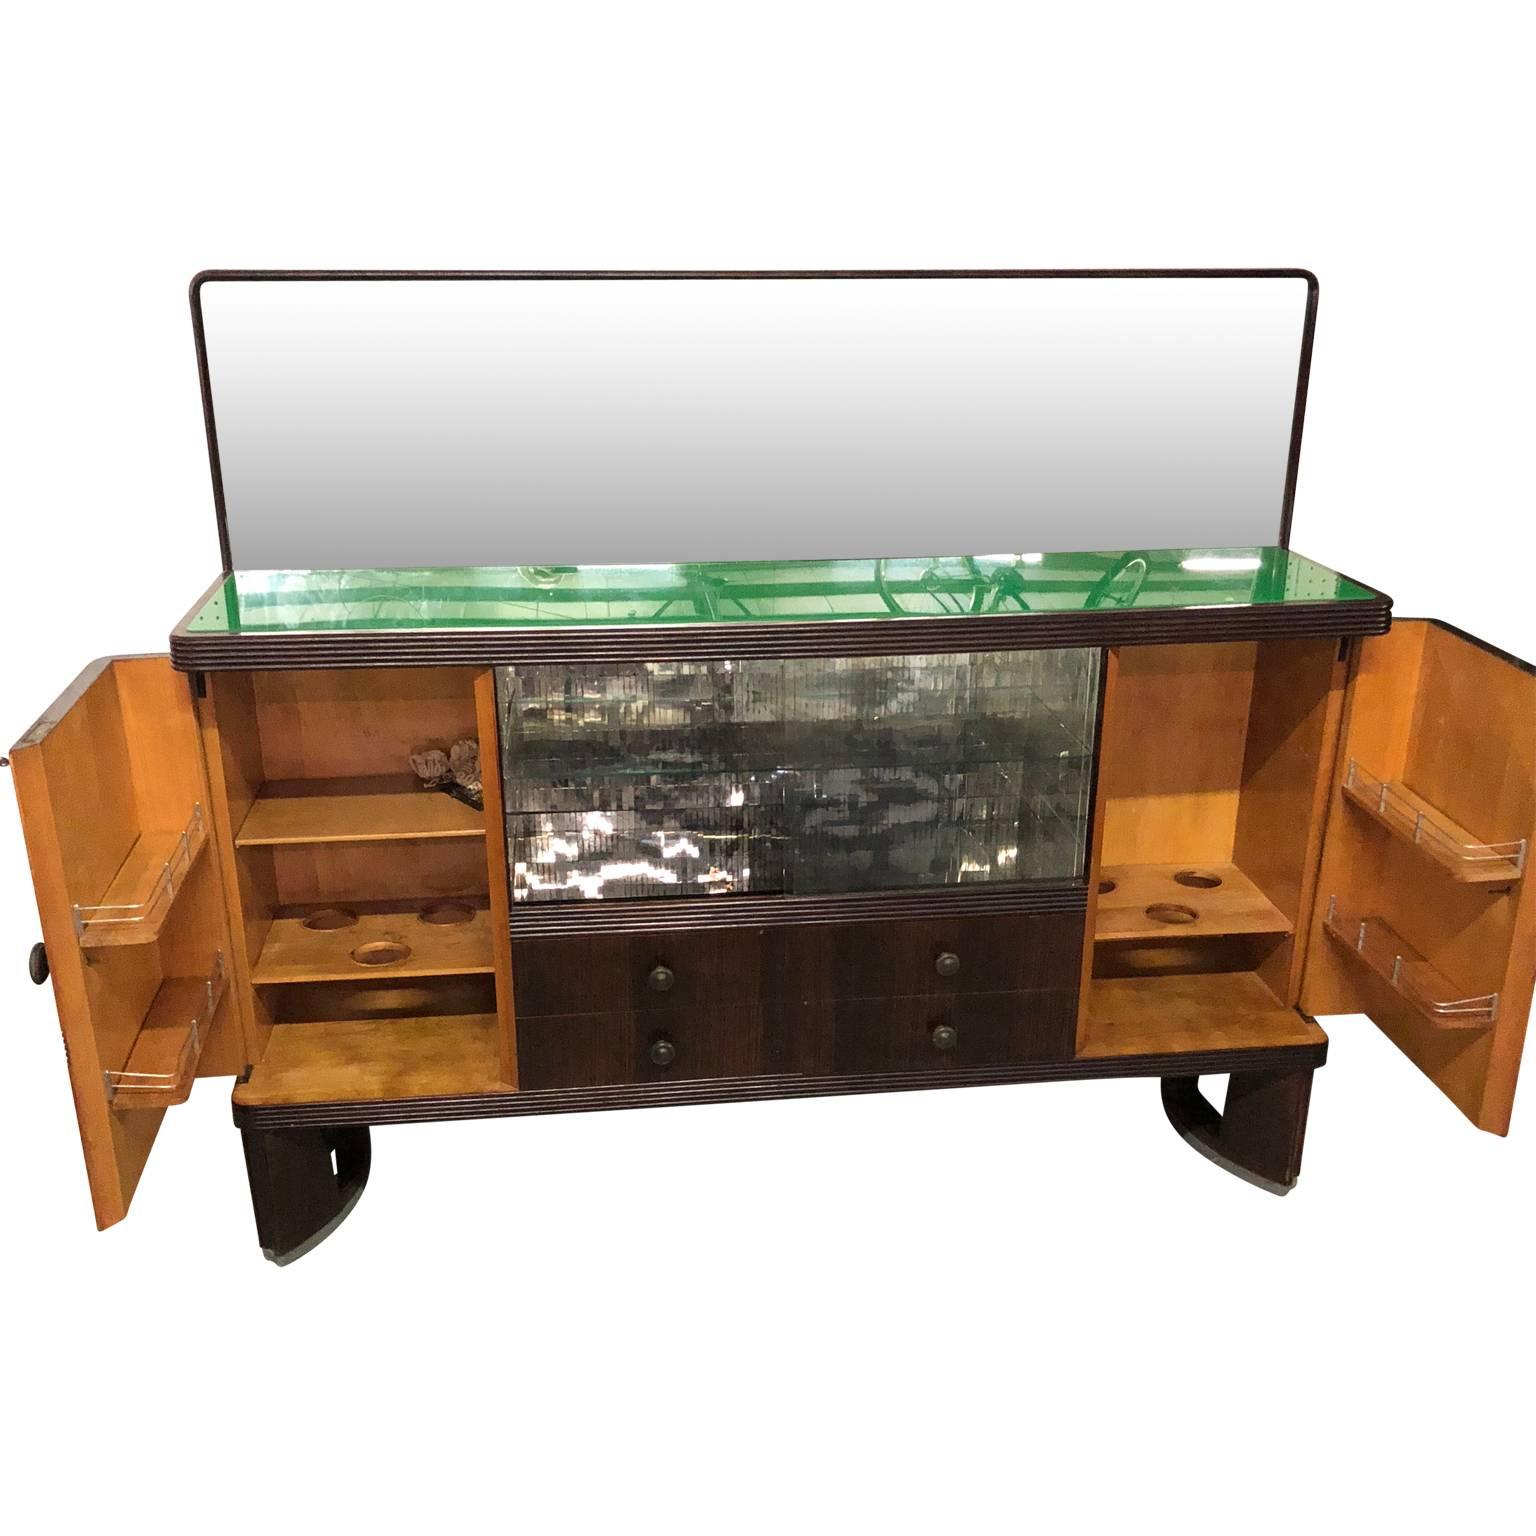 20th Century Vintage Italian Art Deco Sideboard with Dry Bar, 1930s